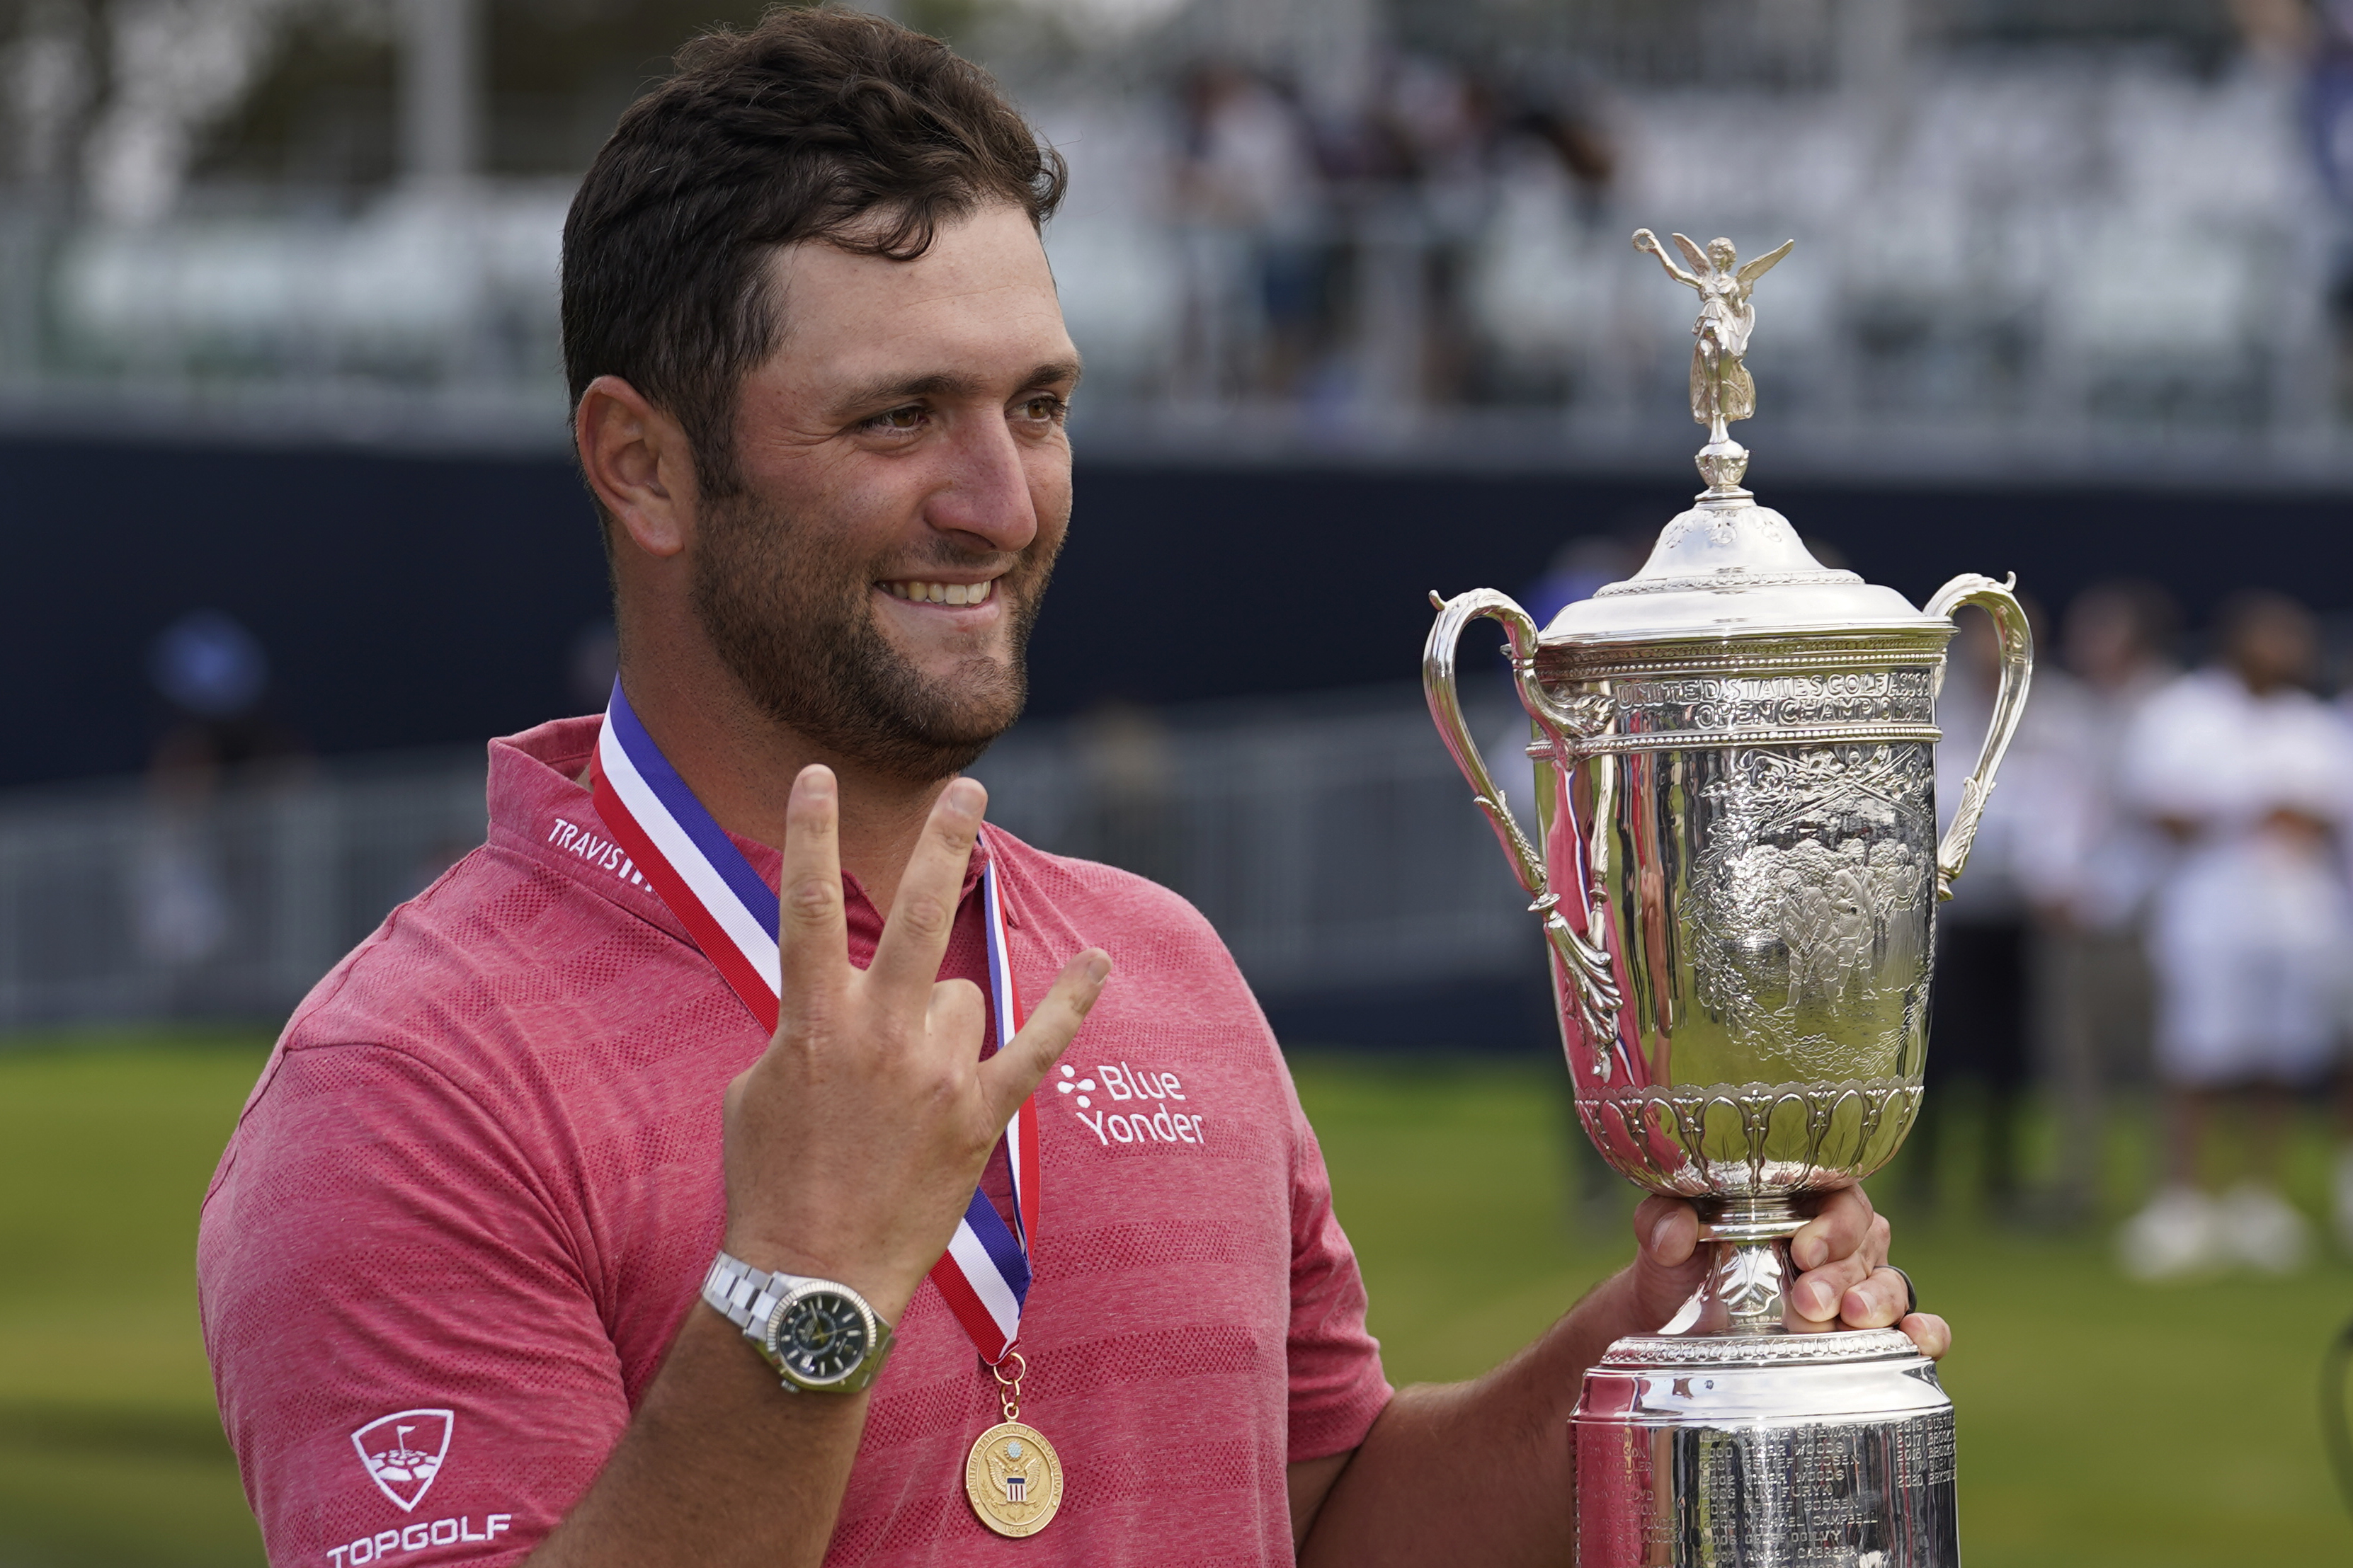 Us Open Golf Purse 2021 Prize Money Payout For Top Players On Final Leaderboard Bleacher Report Latest News Videos And Highlights